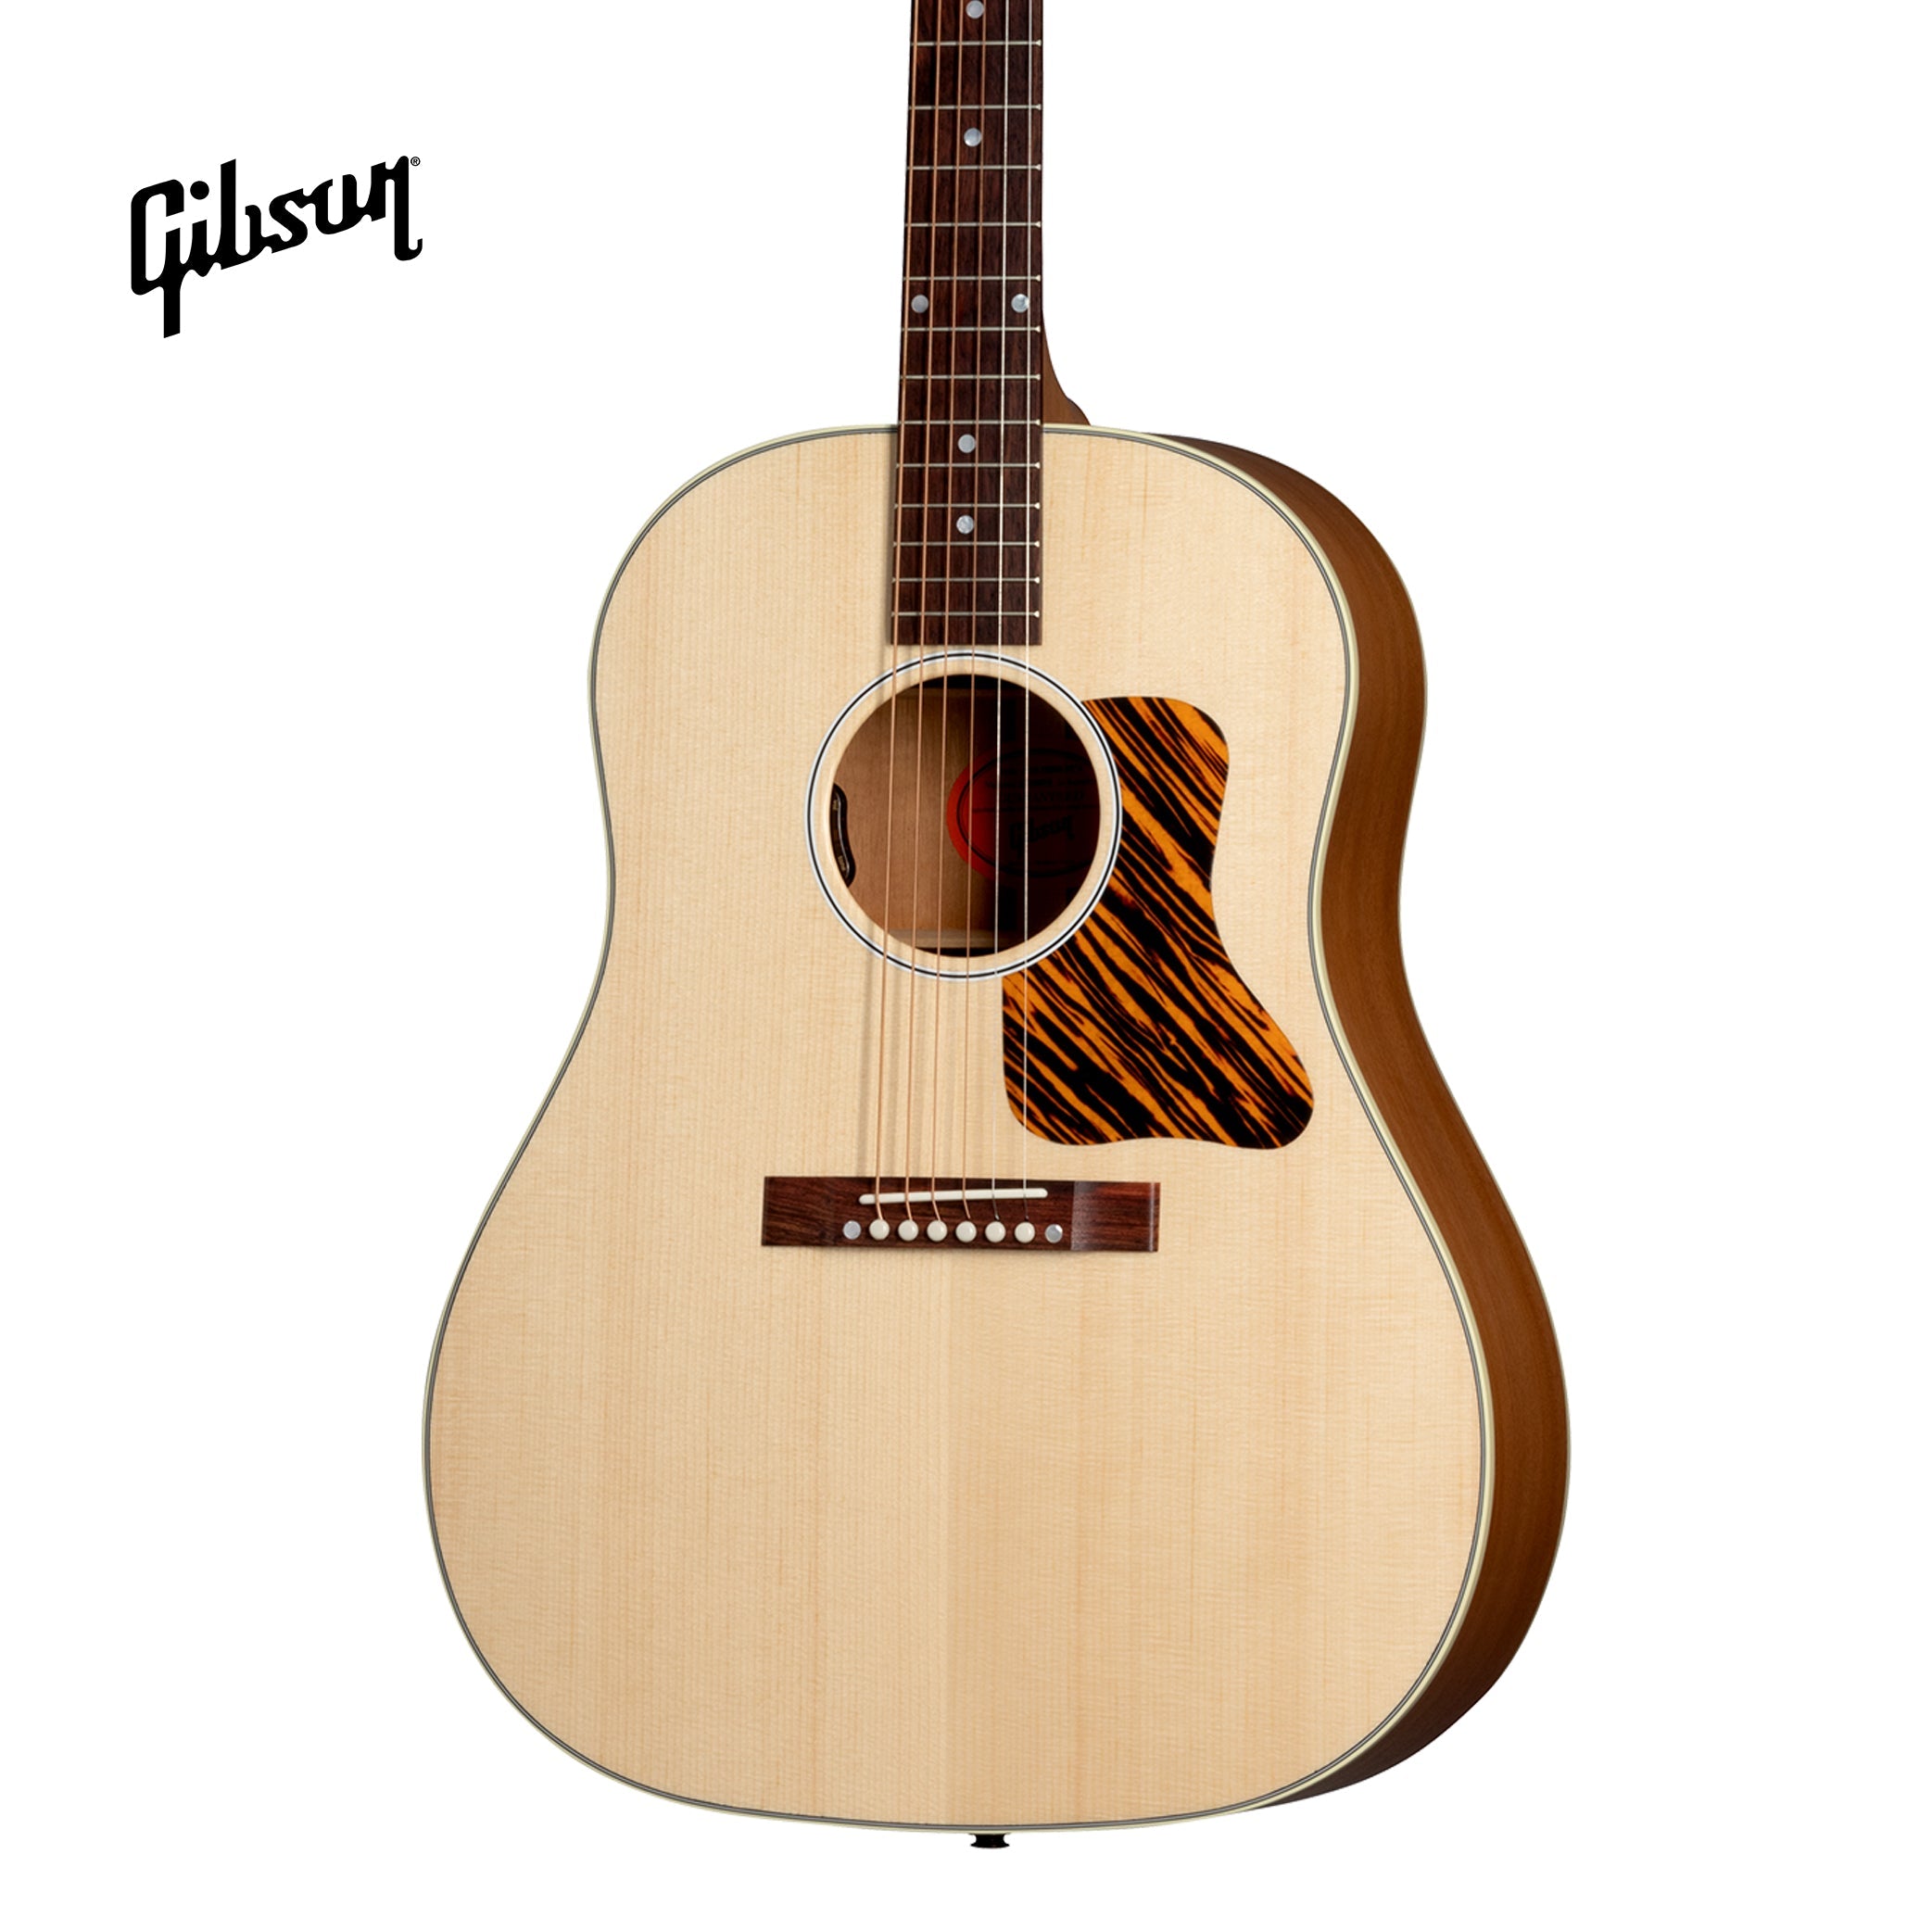 GIBSON J-35 FADED 30S ACOUSTIC-ELECTRIC GUITAR - ANTIQUE NATURAL